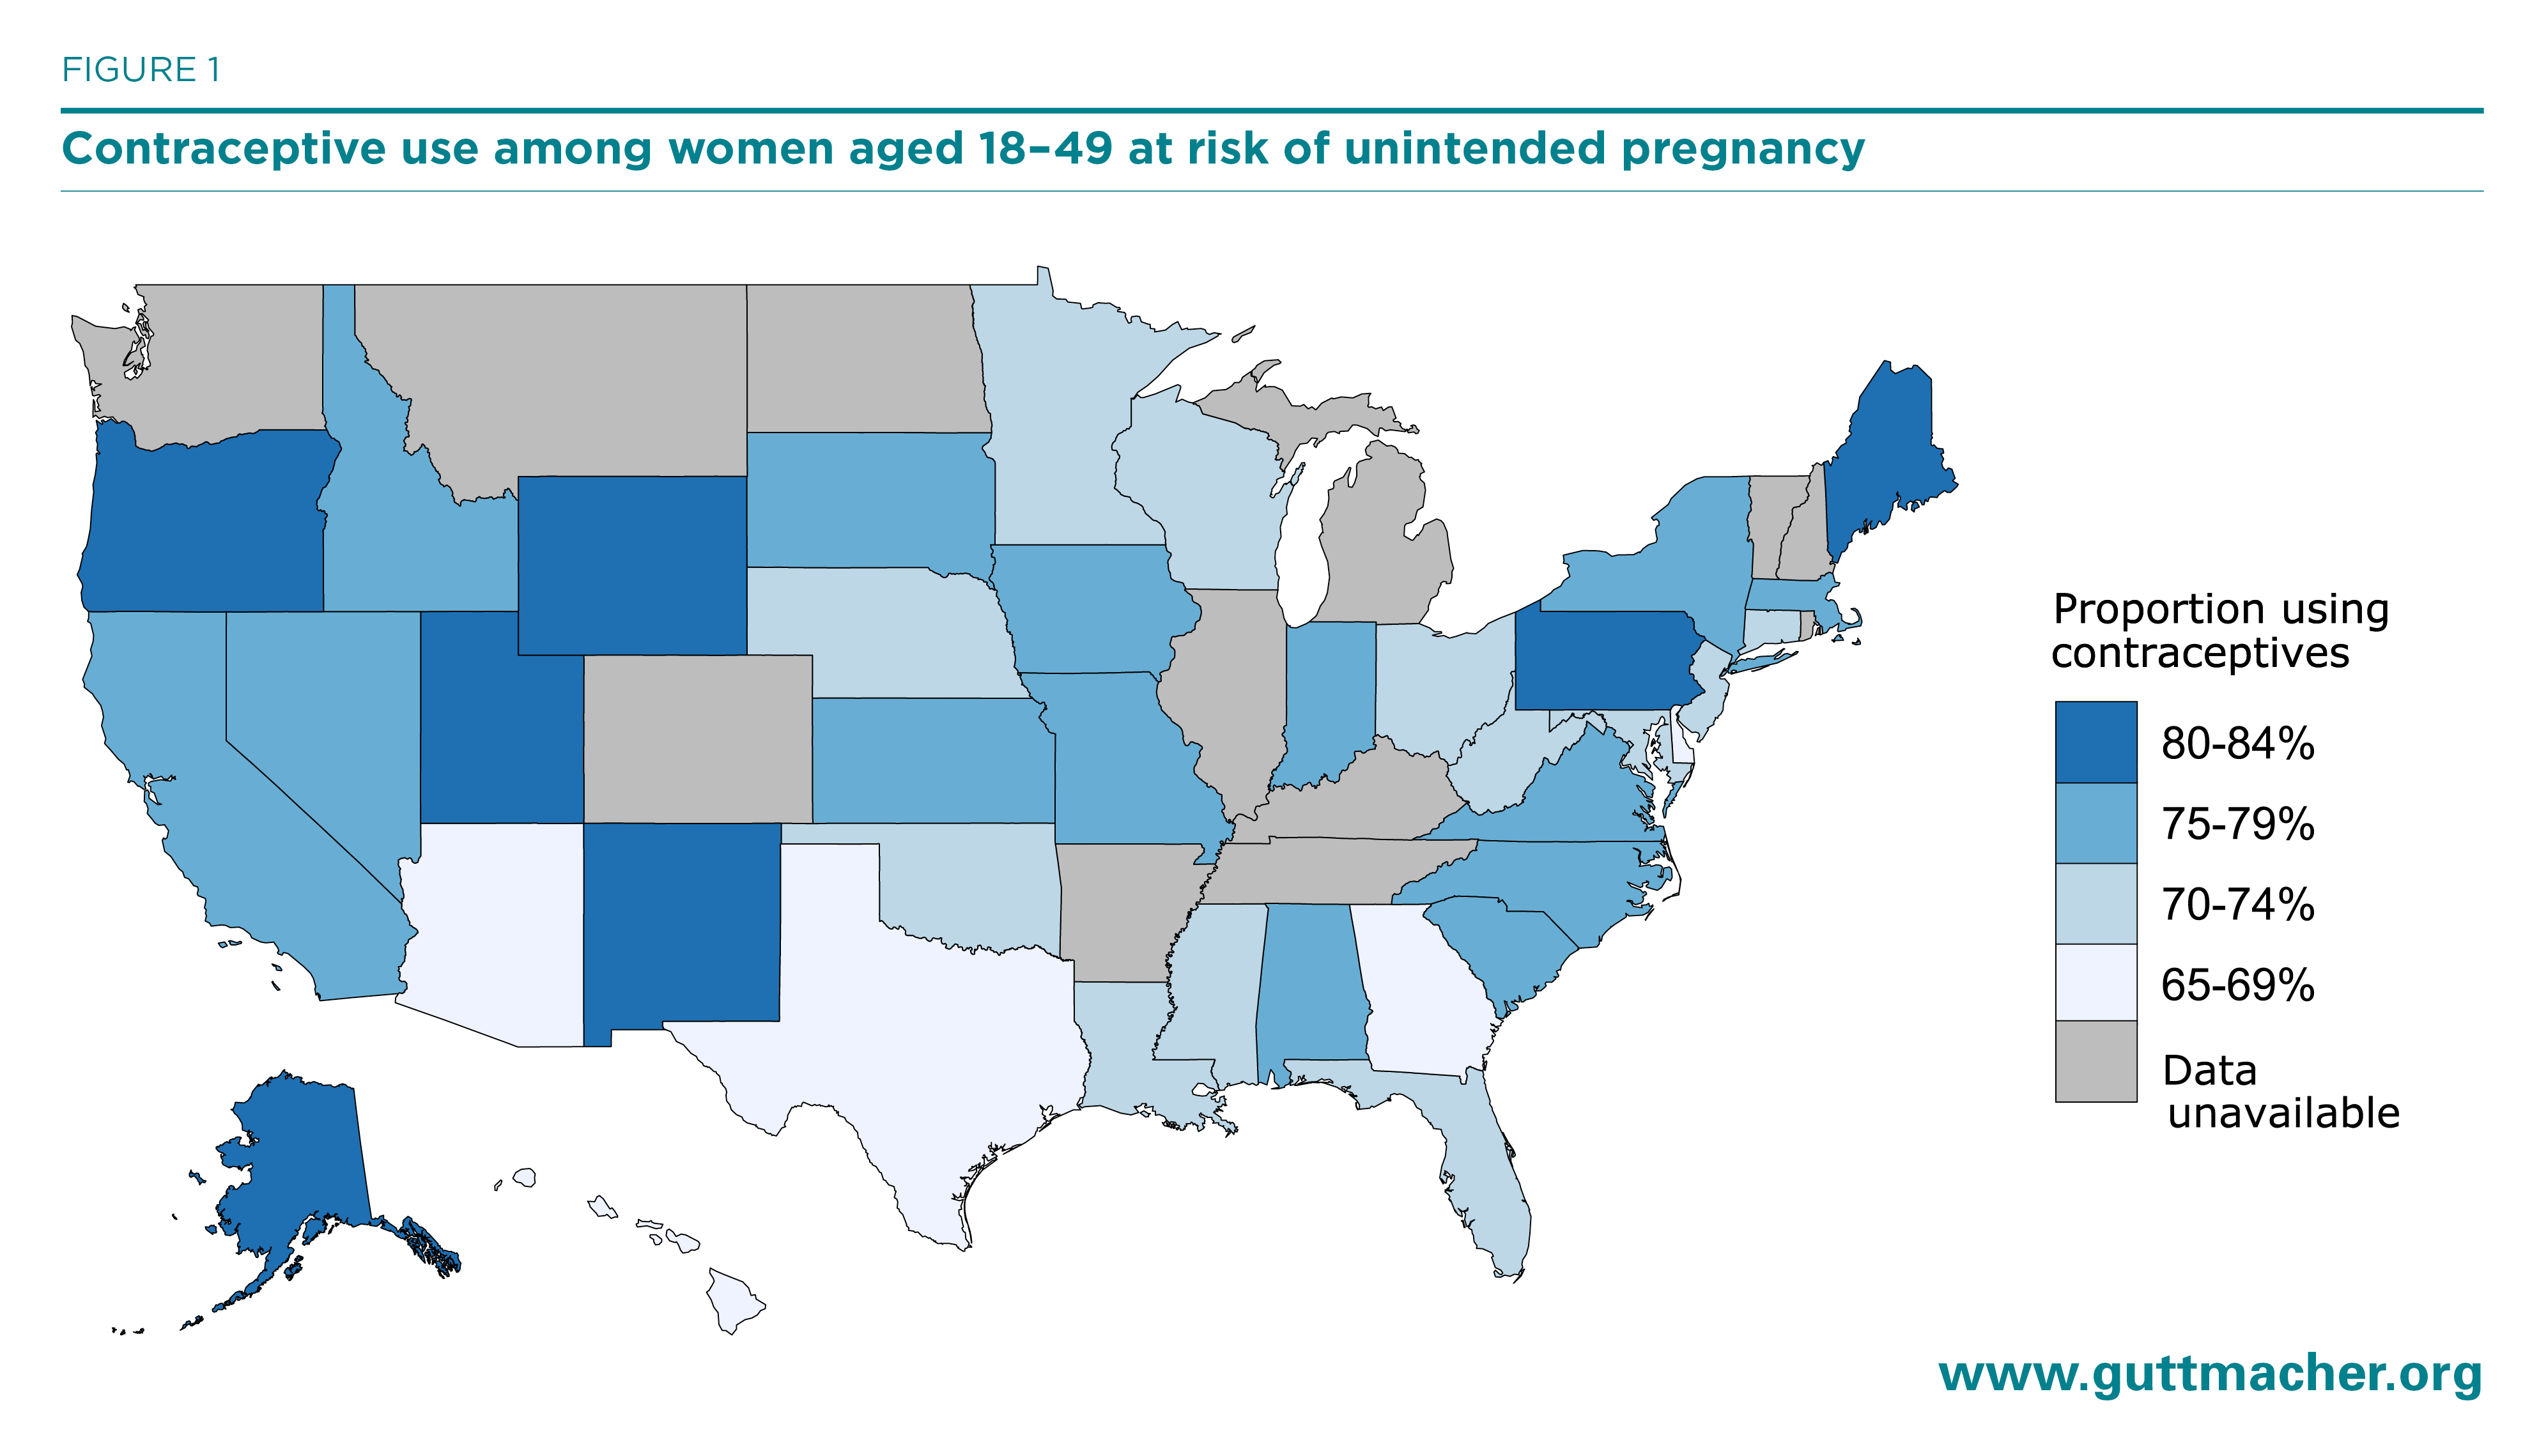 Contraceptive use among women aged 18-49 at risk of unintended pregnancy